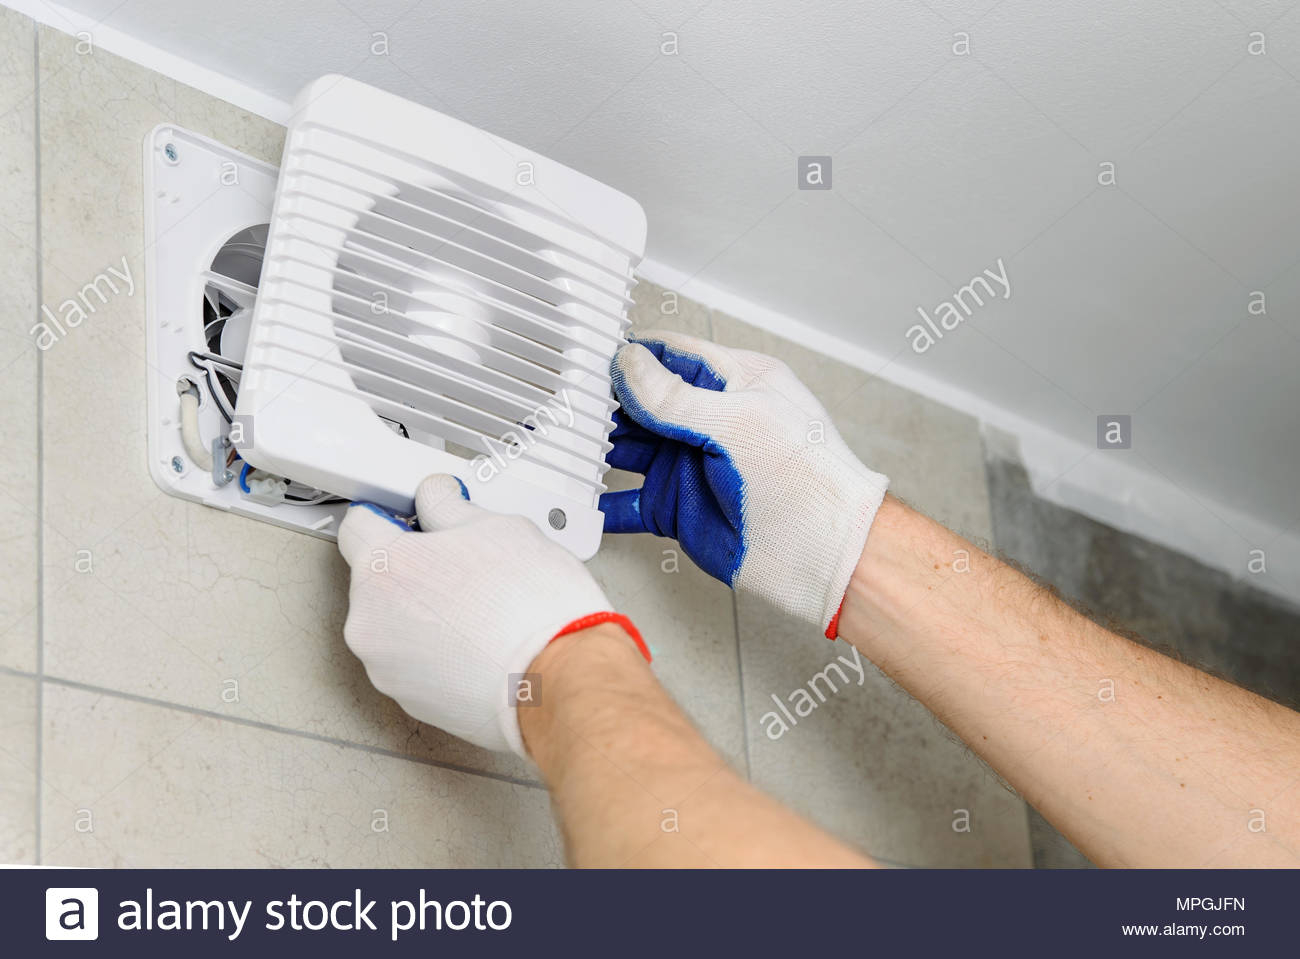 Exhaust Fan Stock Photos Exhaust Fan Stock Images Alamy with regard to dimensions 1300 X 959